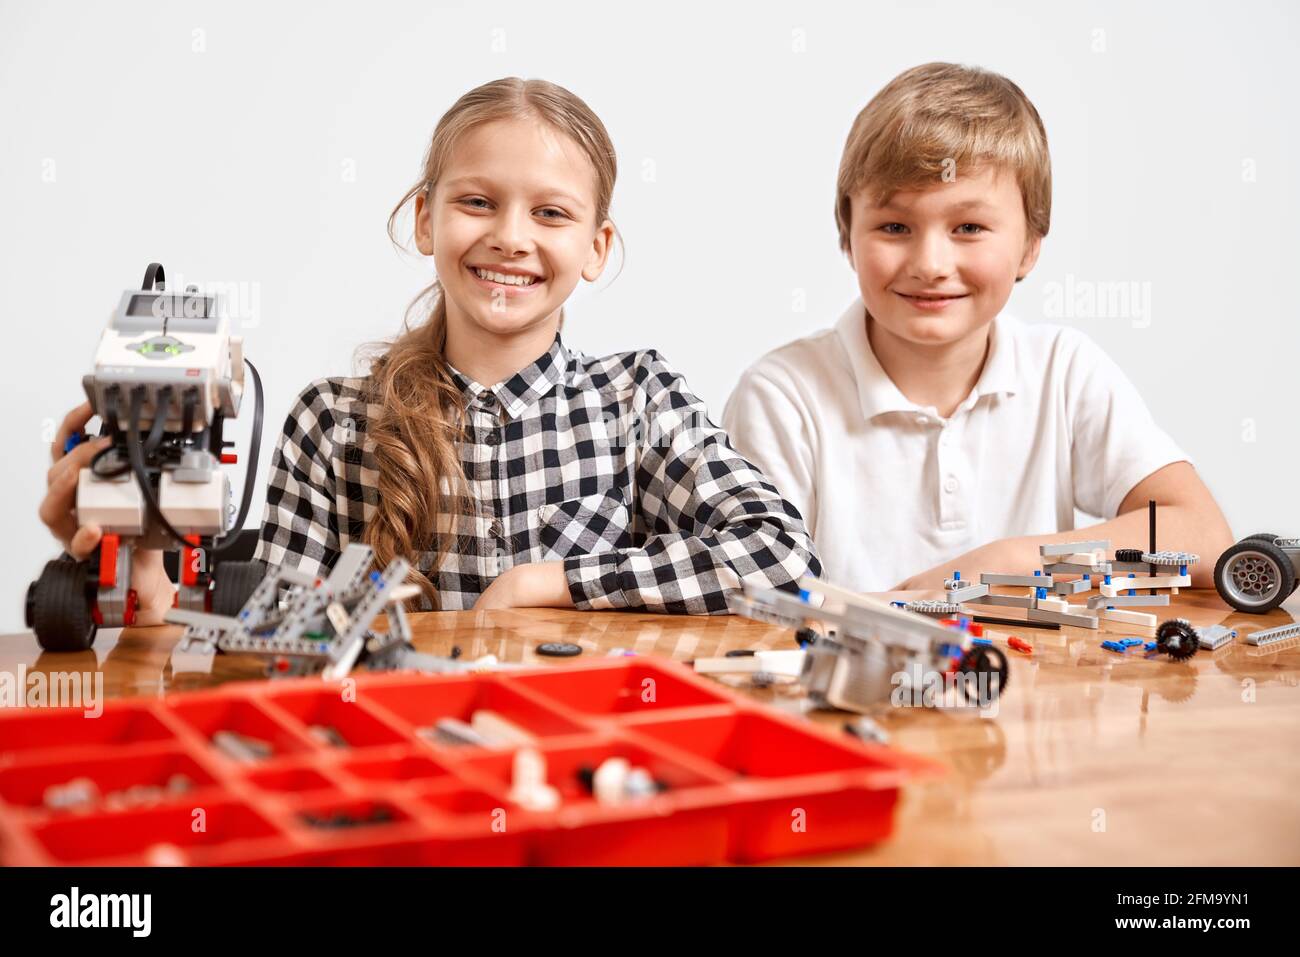 Front view of boy and girl creating robot, red box with building kit on table. Nice interested friends smiling, lookig at camera and working on project together. Concept of science engineering. Stock Photo